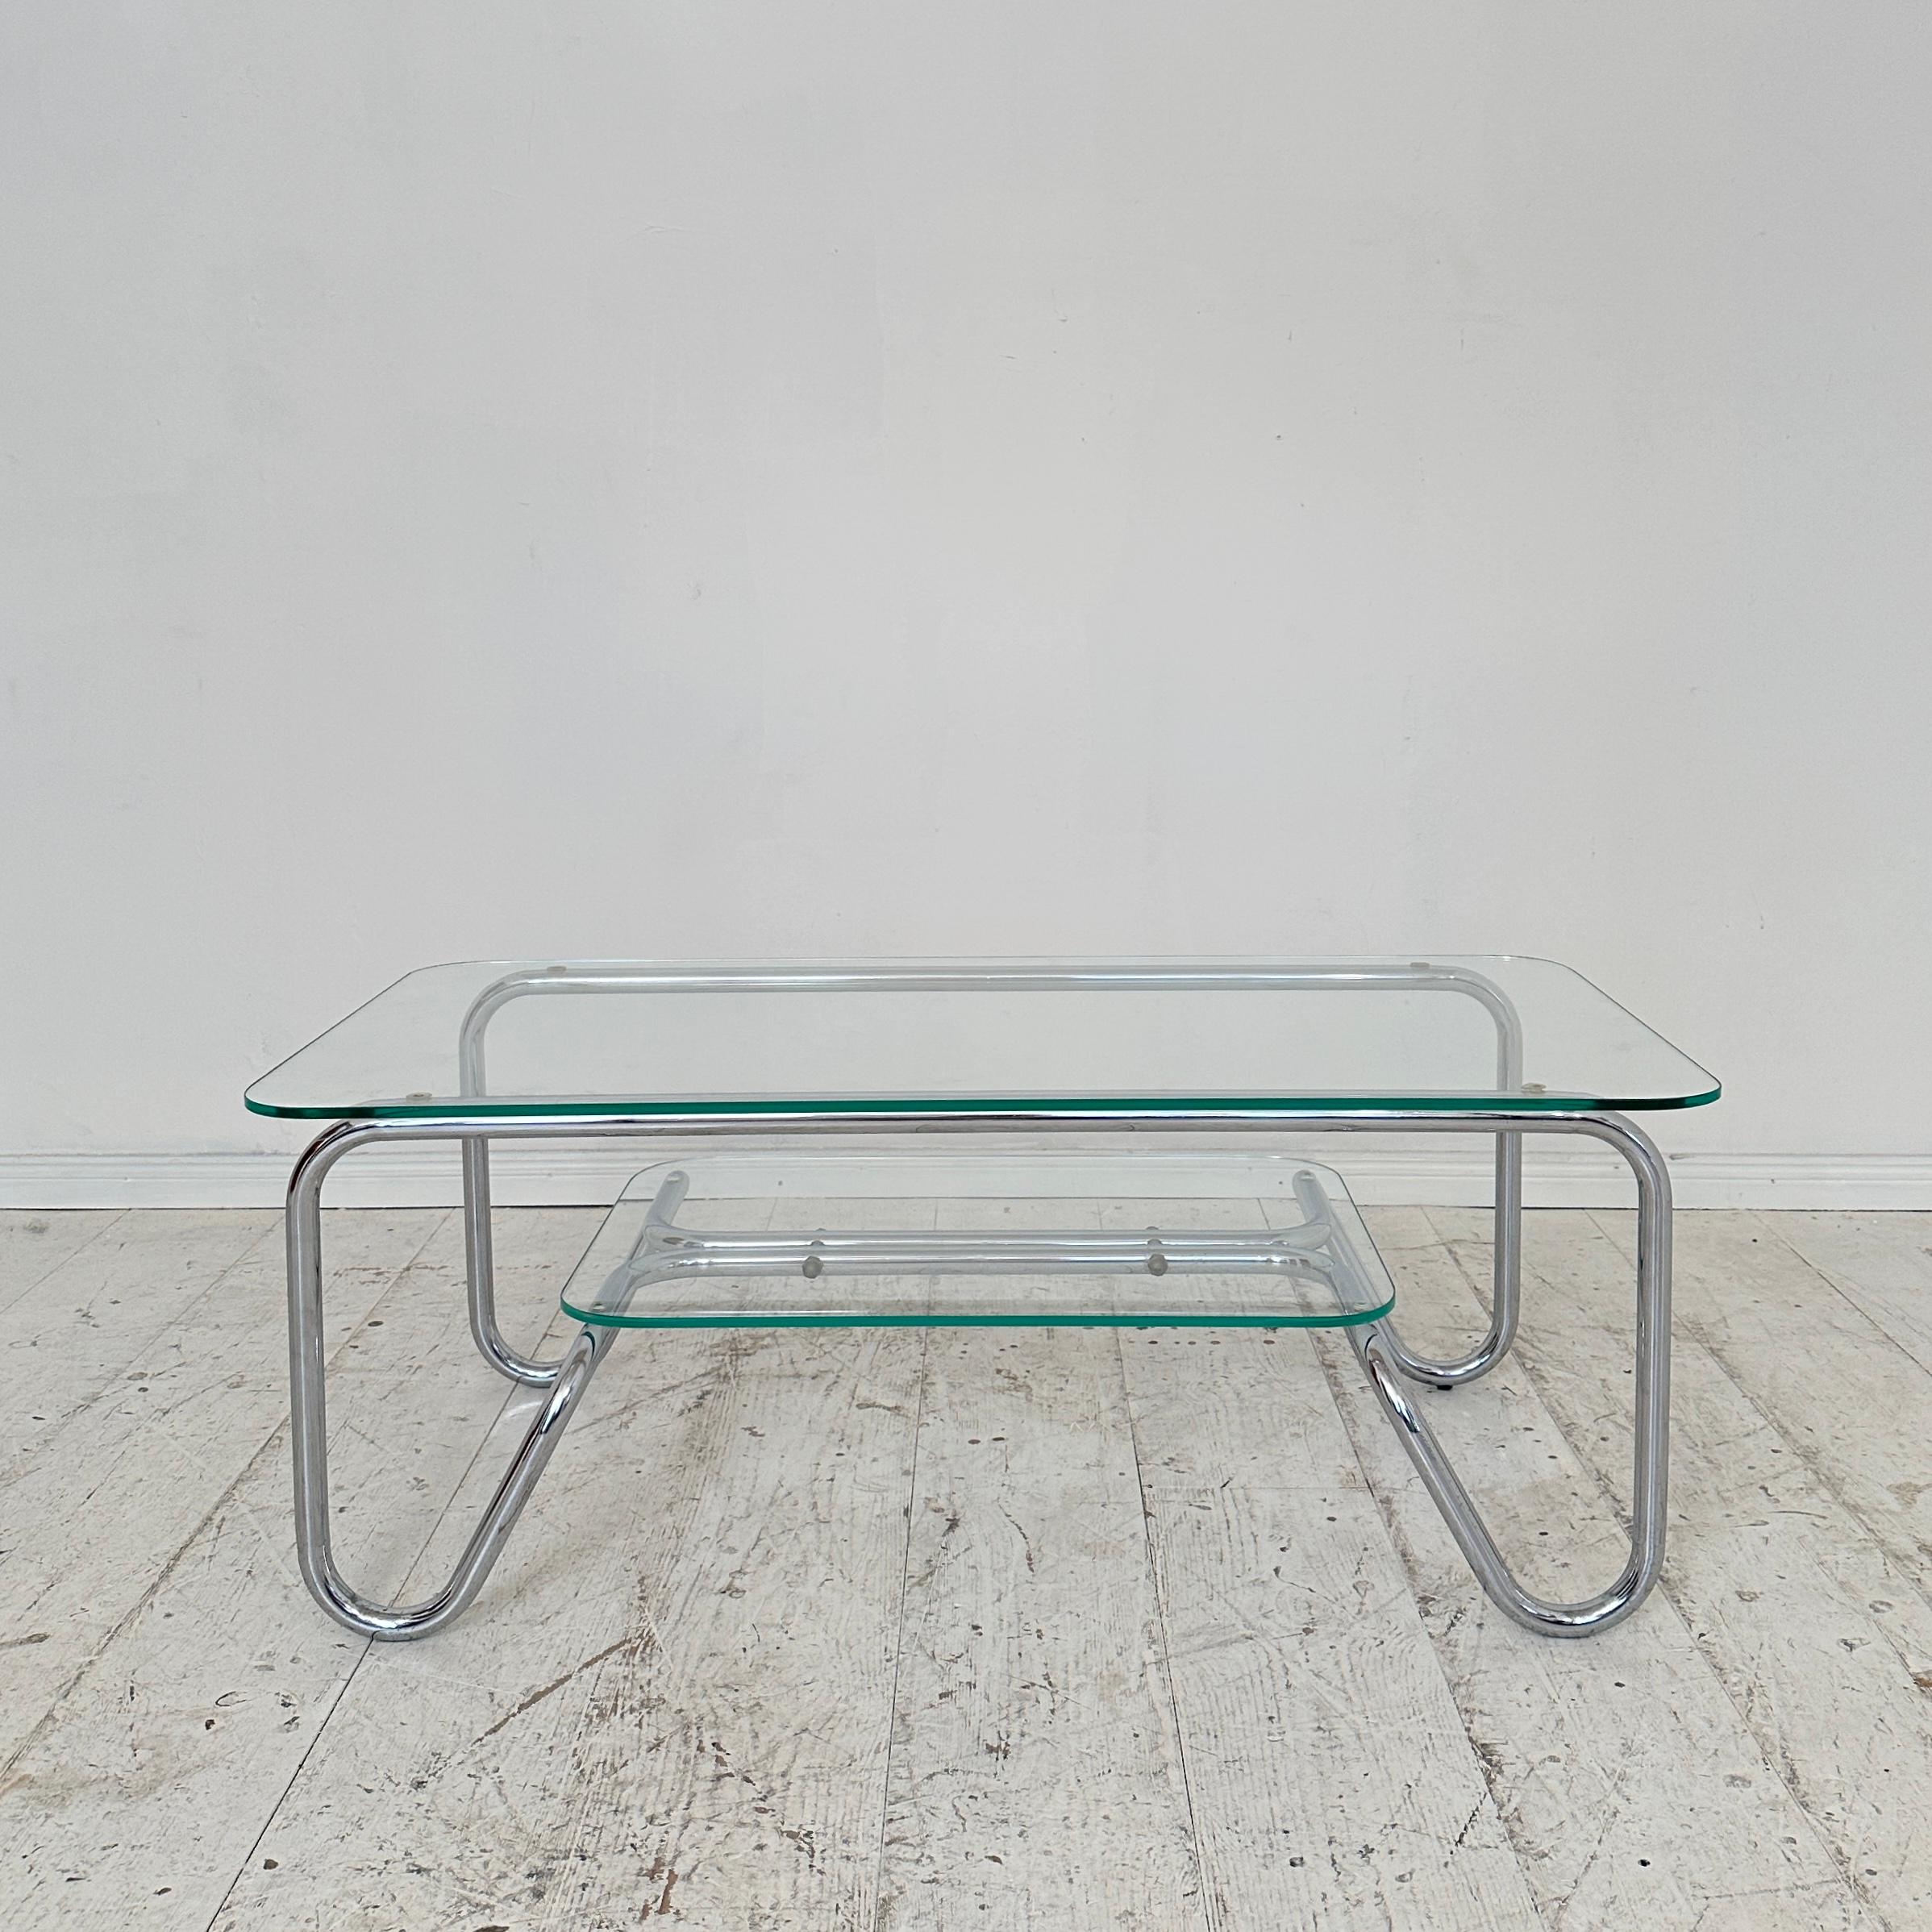 Crafted in 1970, this Mid Century Italian Chrome Coffee Table epitomizes the sleek sophistication of Bauhaus design. The marriage of chrome and glass embodies the ethos of form following function, characteristic of the movement. With clean lines and